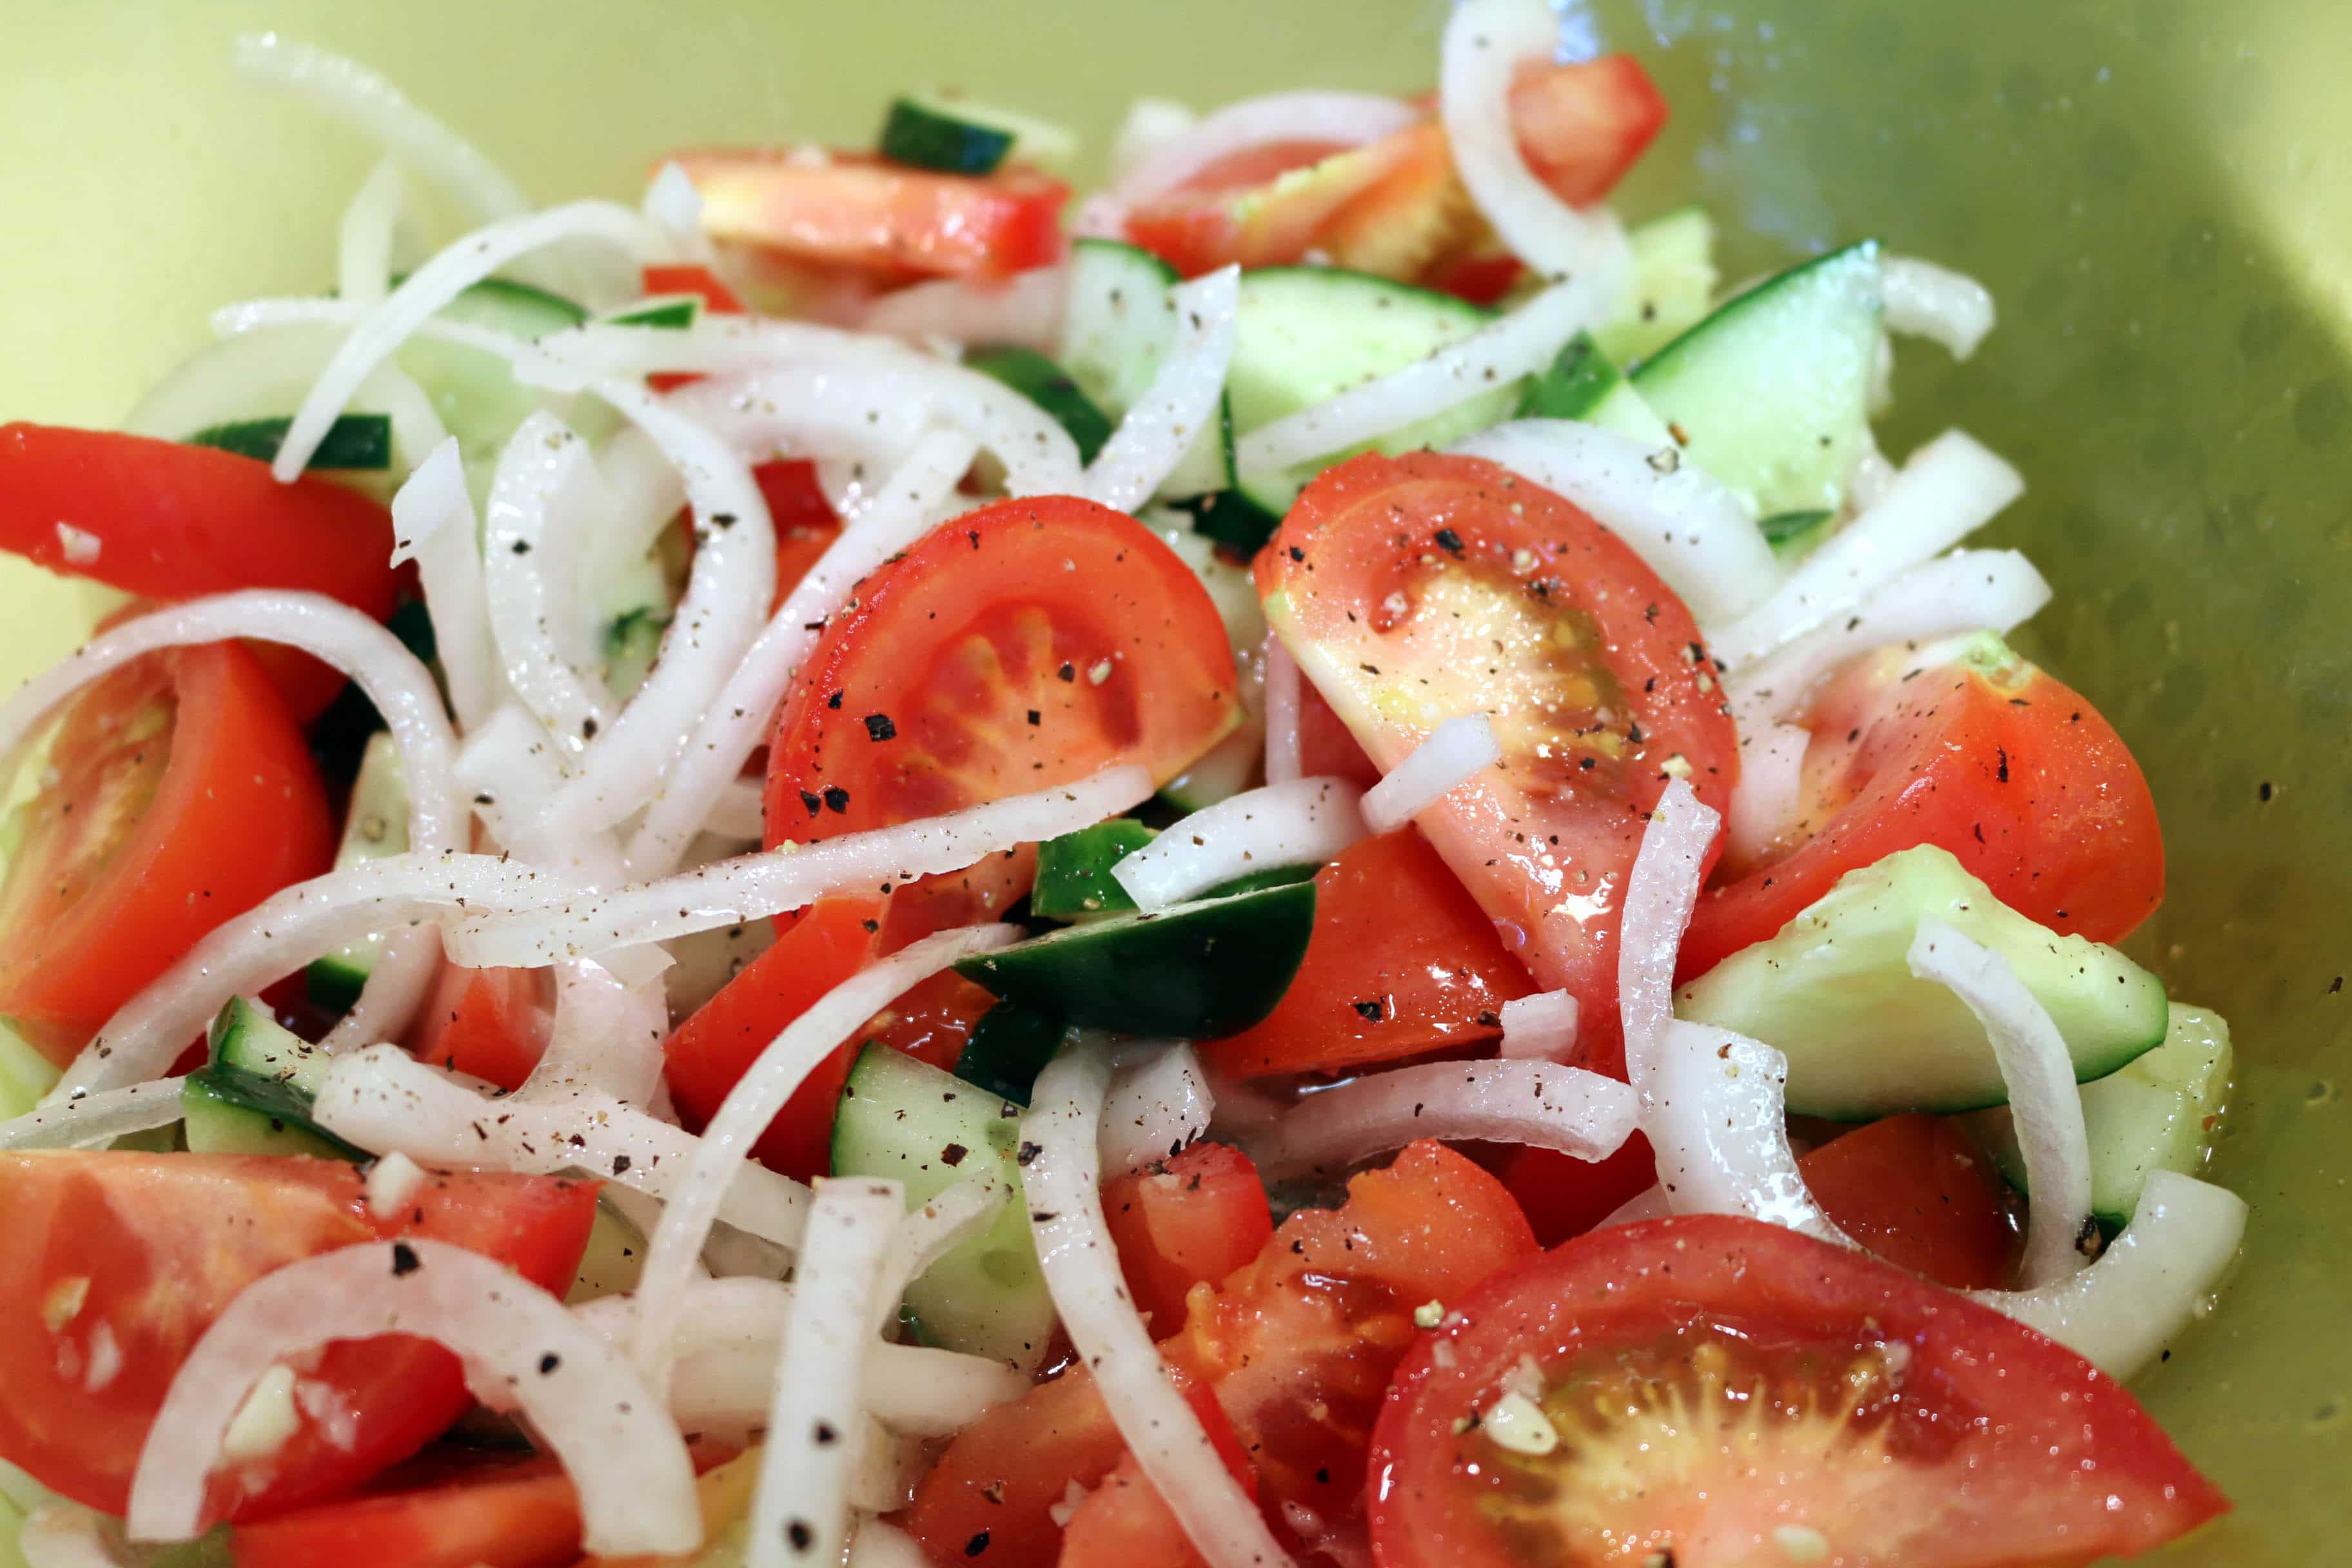 Marinated tomatoes, white onions, and cucumbers.